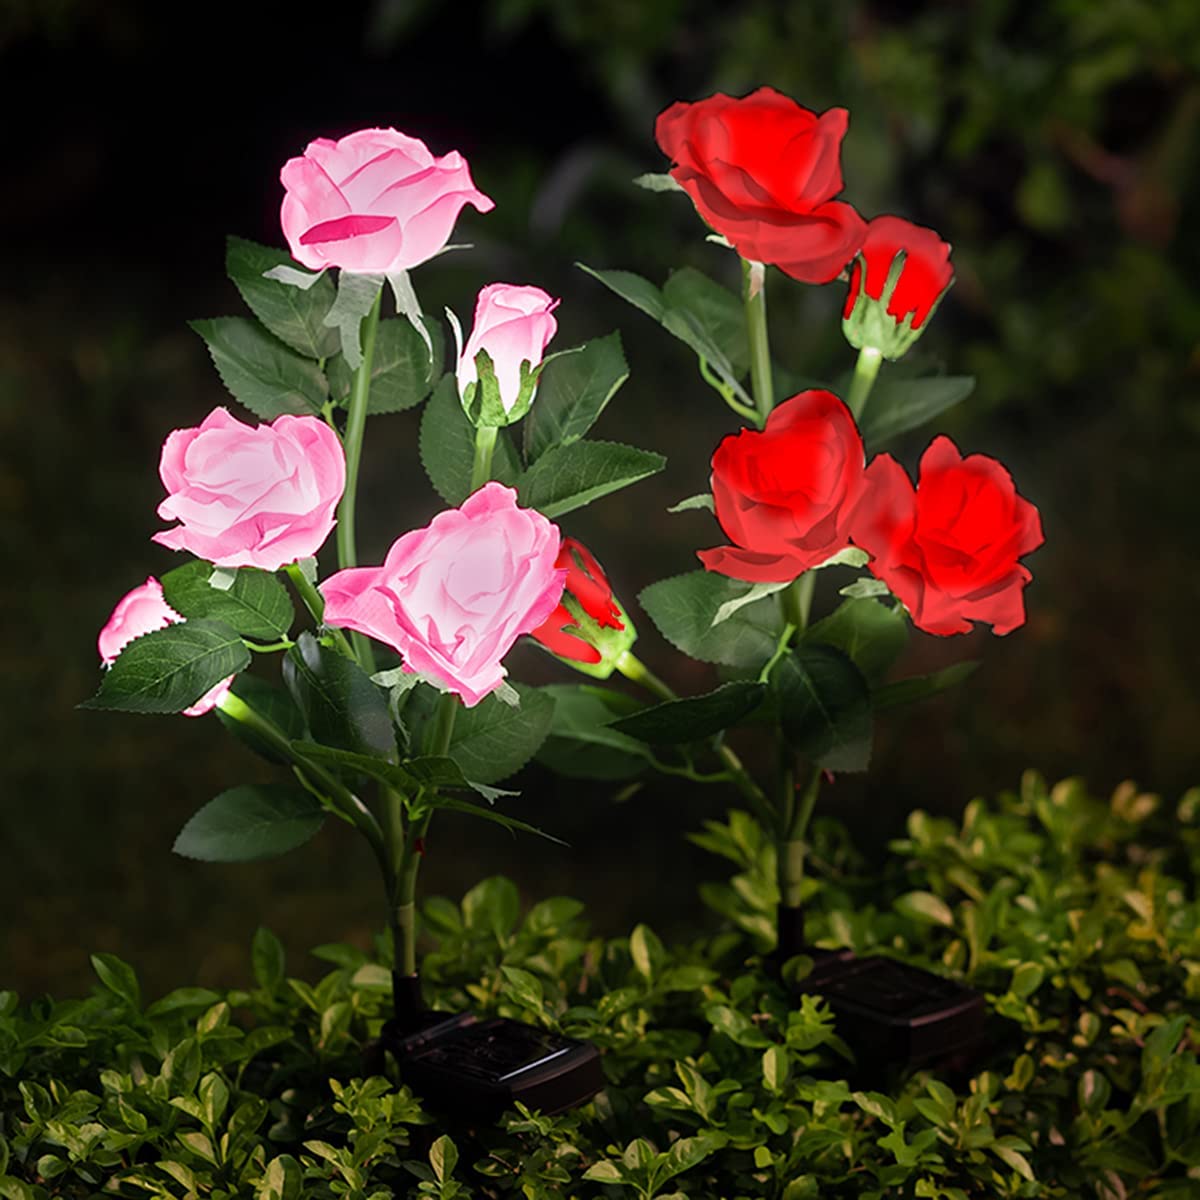 Outdoor Solar Garden Flower Lights, Pack Artificial Rose LED Stake Lights  Waterproof Solar Powered Decorative Lighting for Patio, Backyard, Pathway,  Garden and More (Pink  Red)